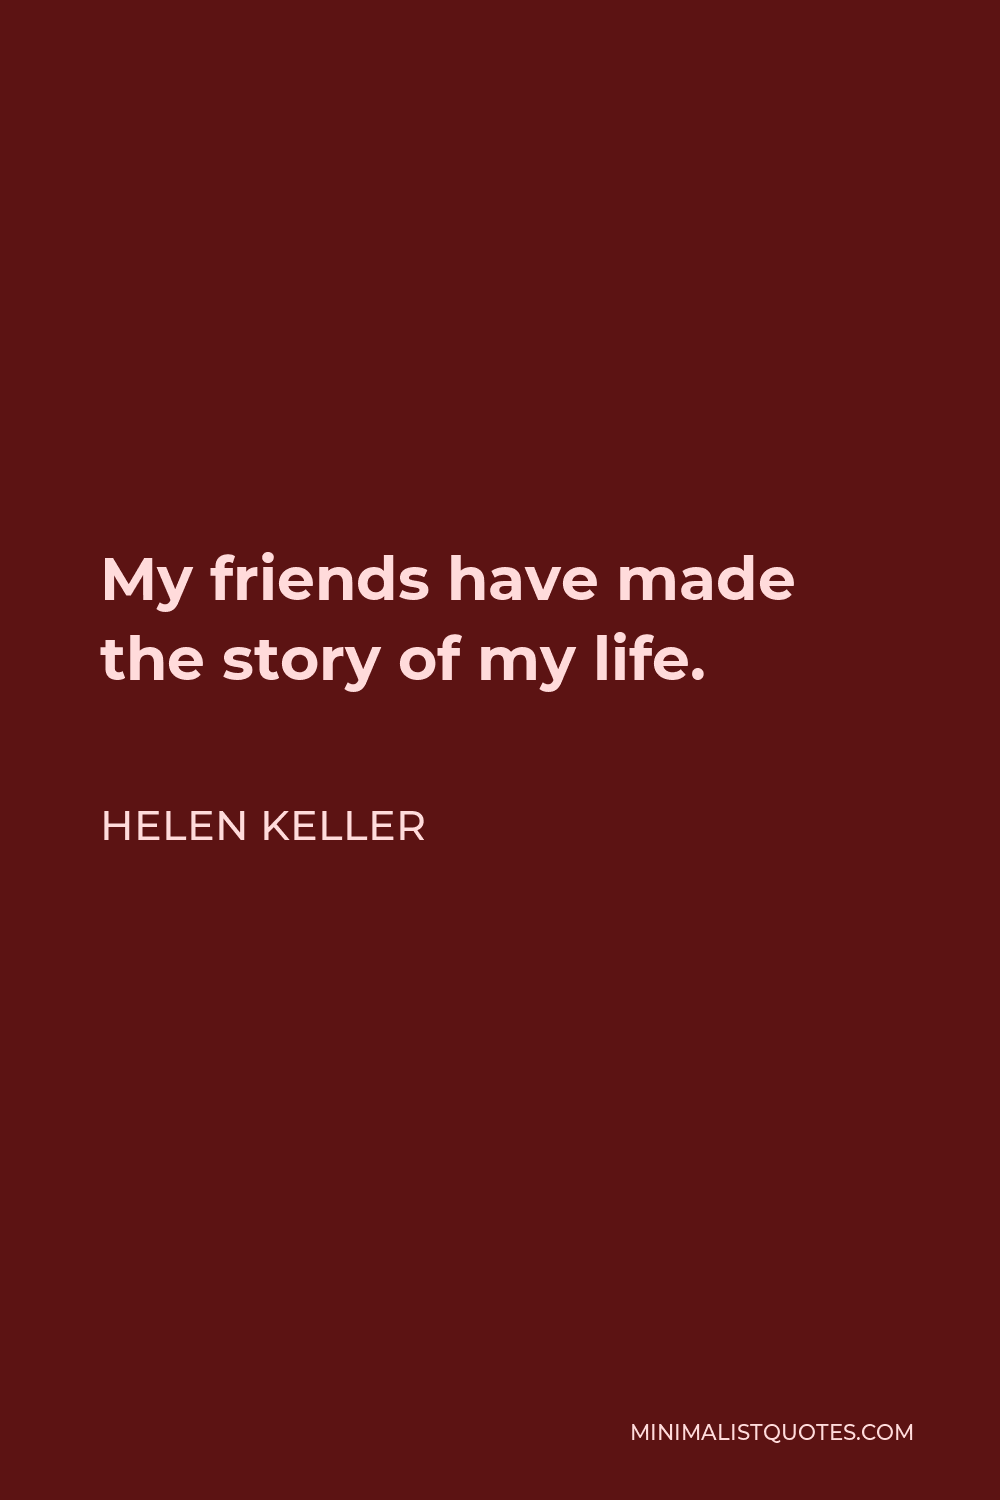 Helen Keller Quote - My friends have made the story of my life.